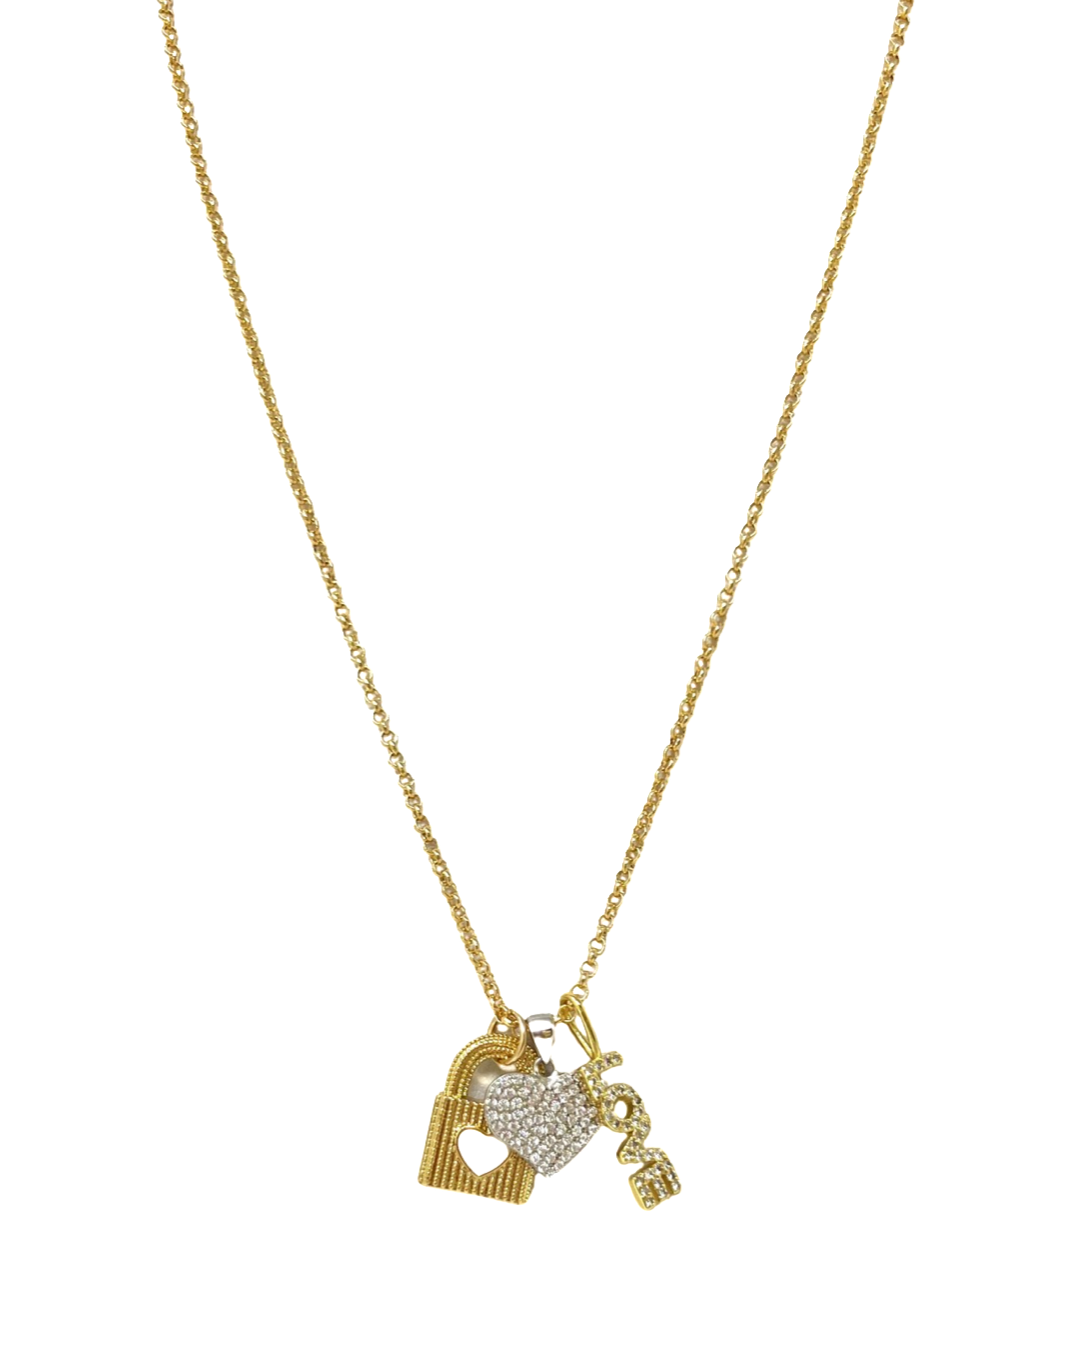 Basket of Love Charm Necklace in Gold